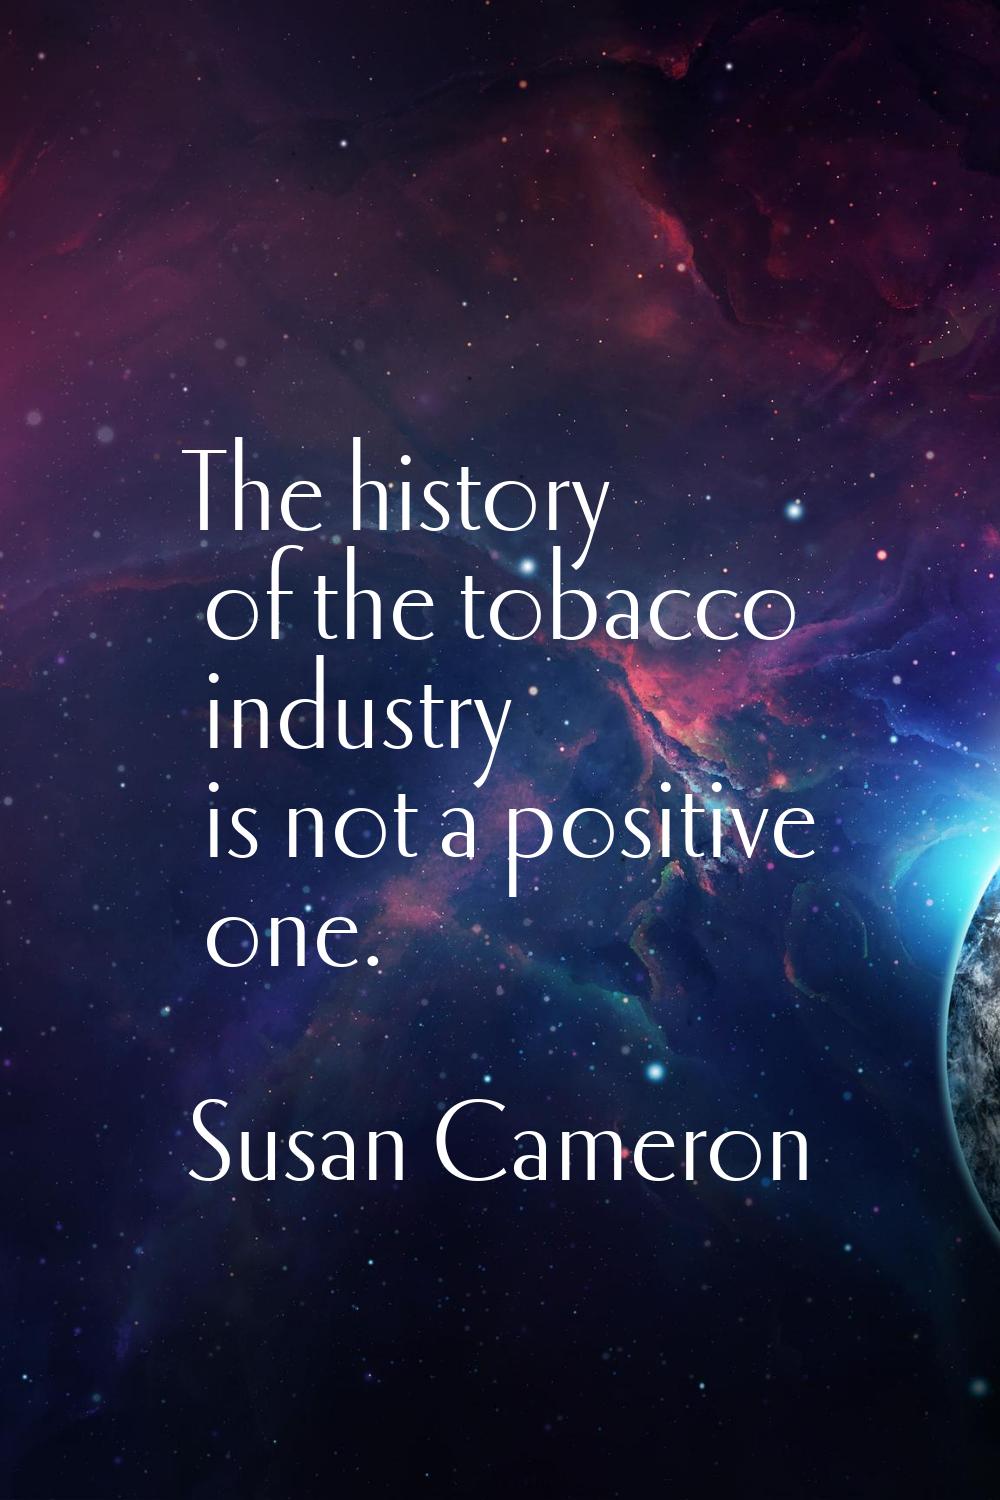 The history of the tobacco industry is not a positive one.